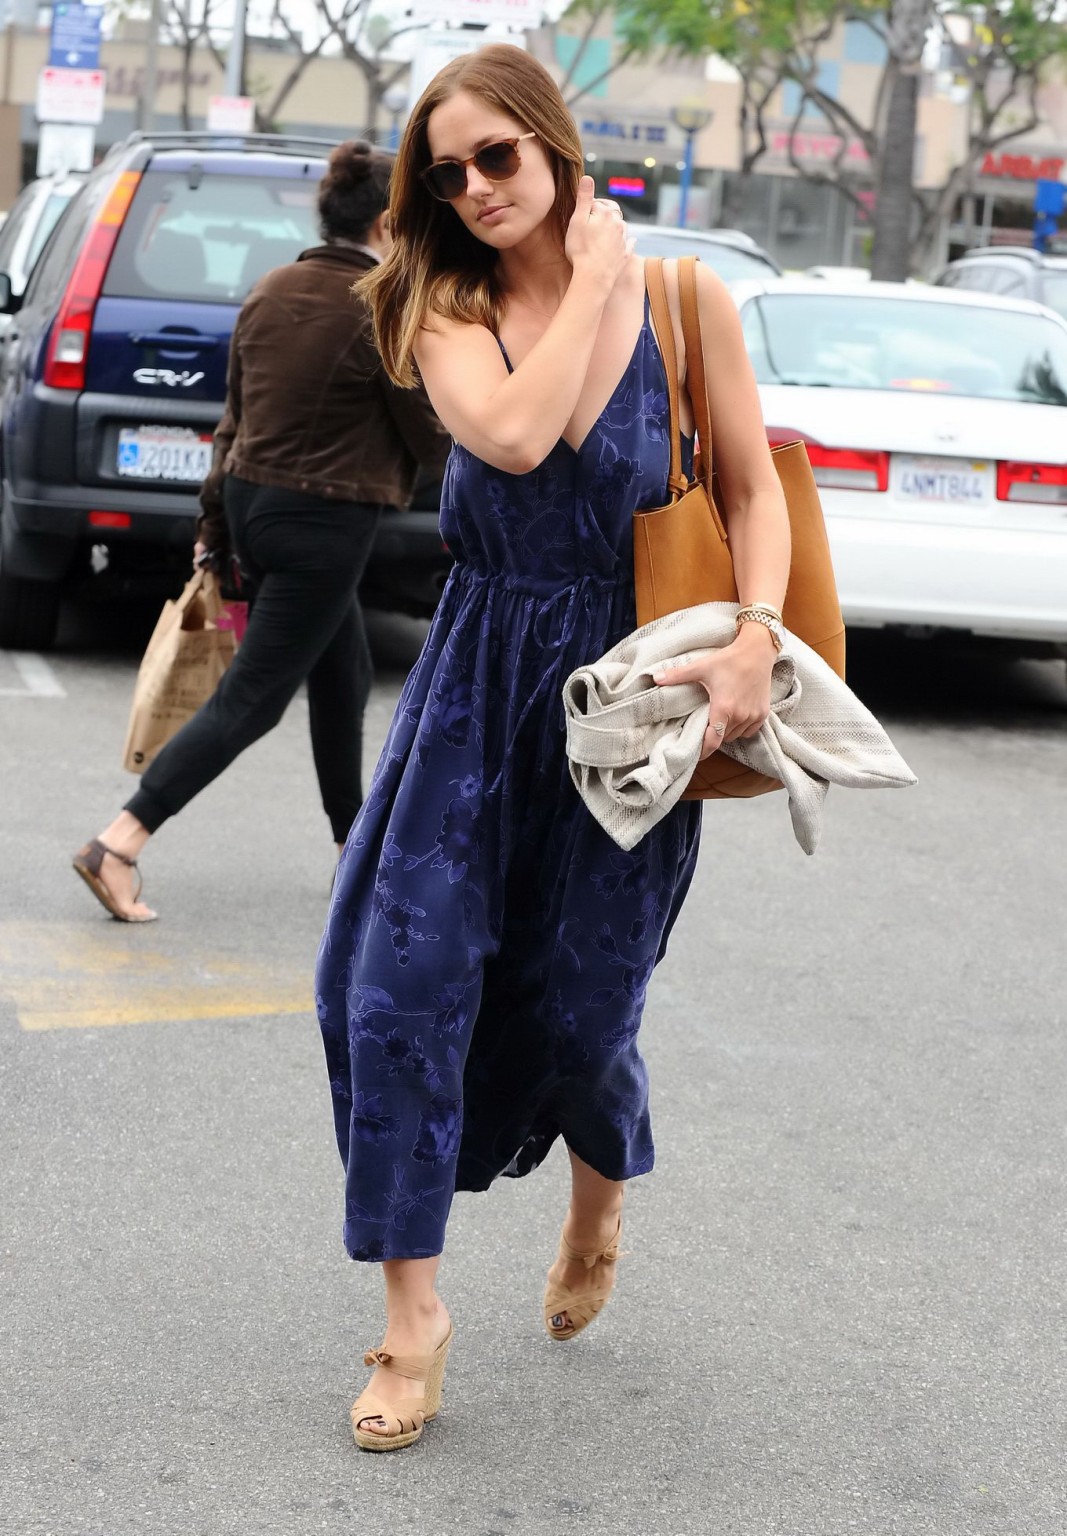 Minka kelly braless showing big cleavage and nipple pokies while shopping at who
 #75161602